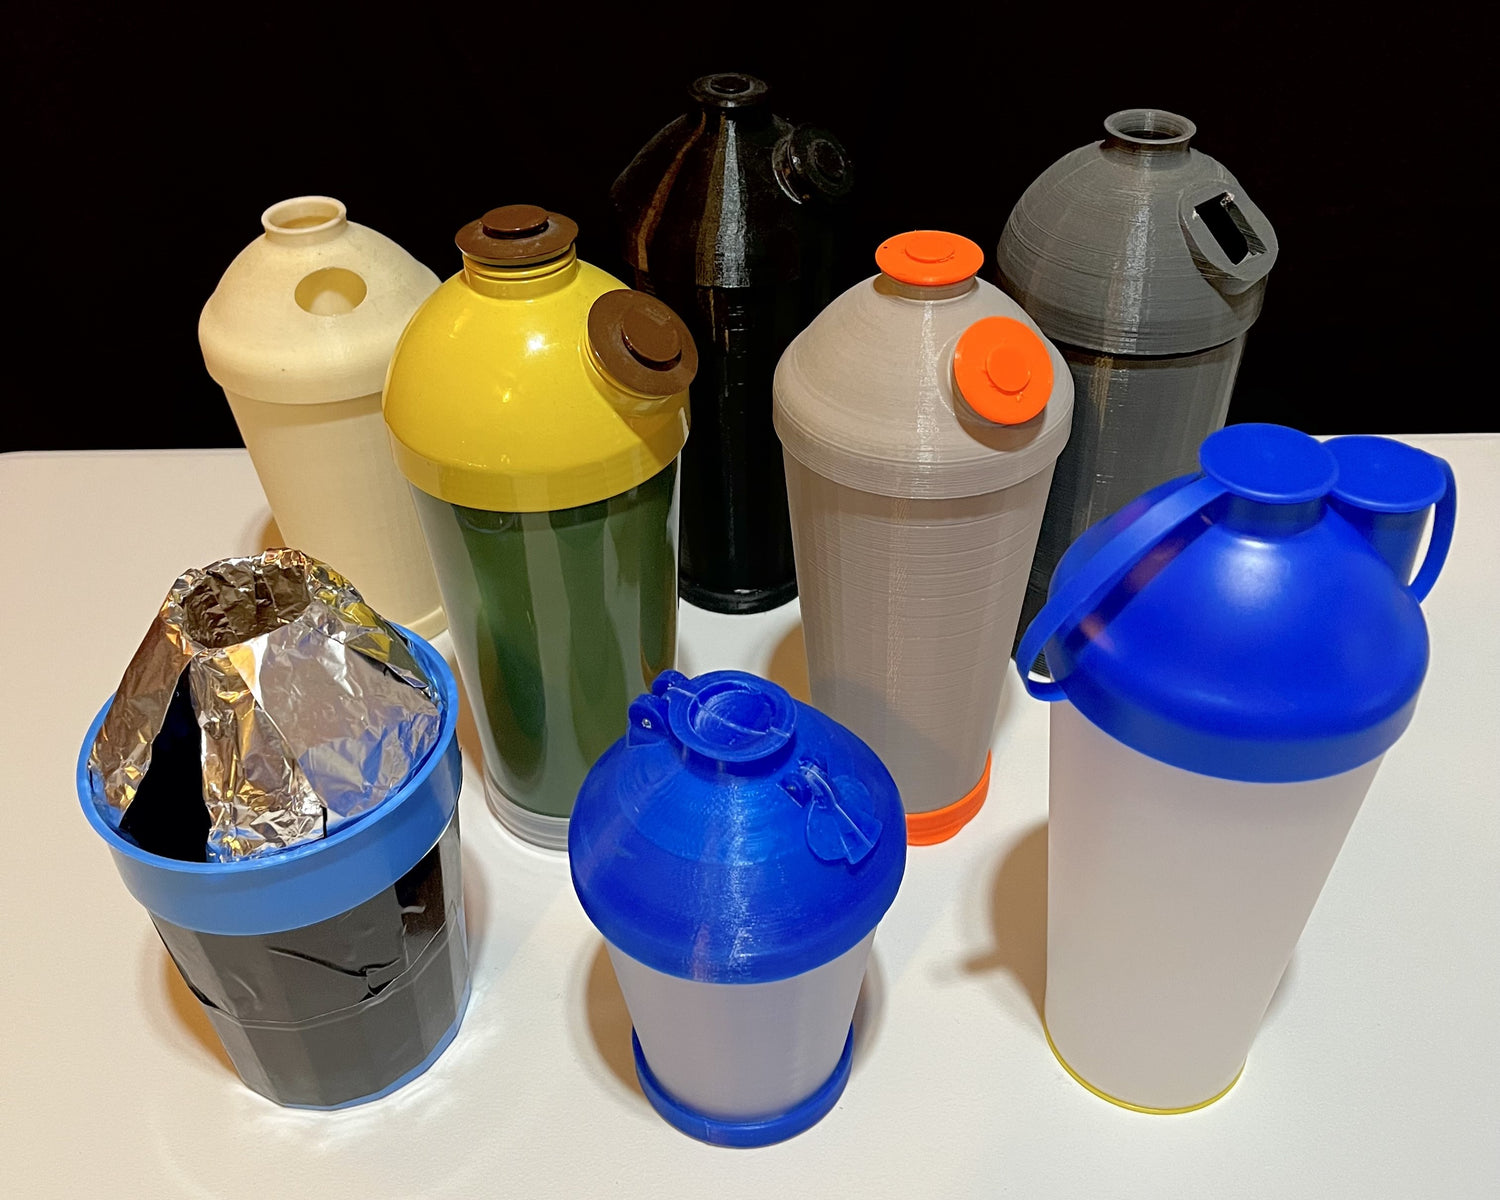 Several prototypes of the ProSeed cup in different colors.